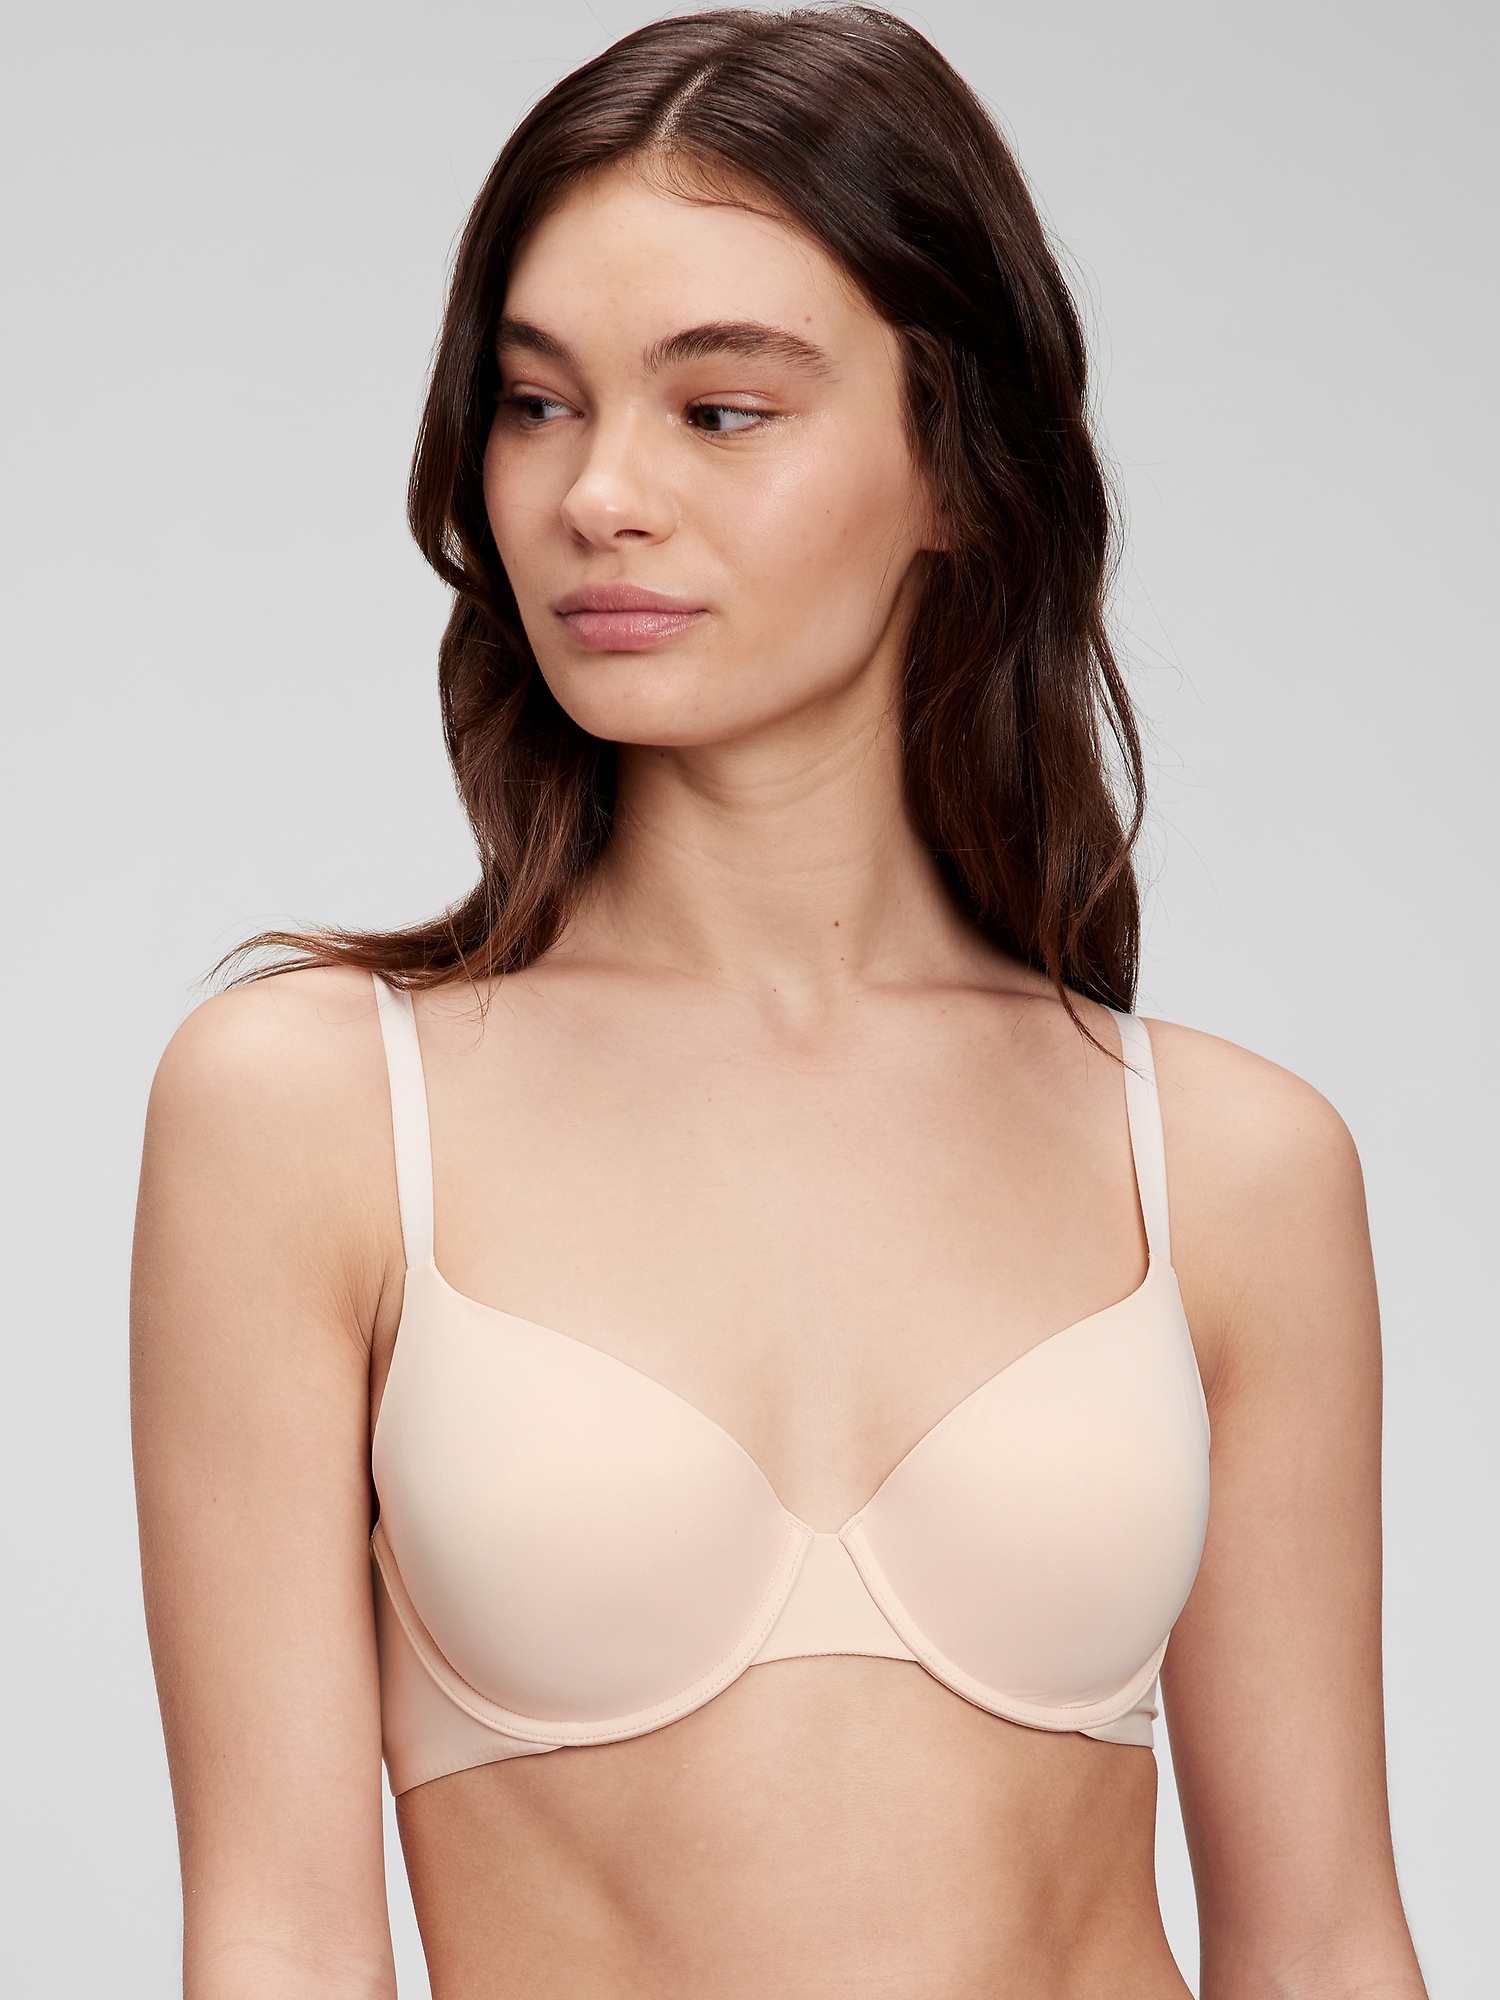 32AA Bra Size Support Active